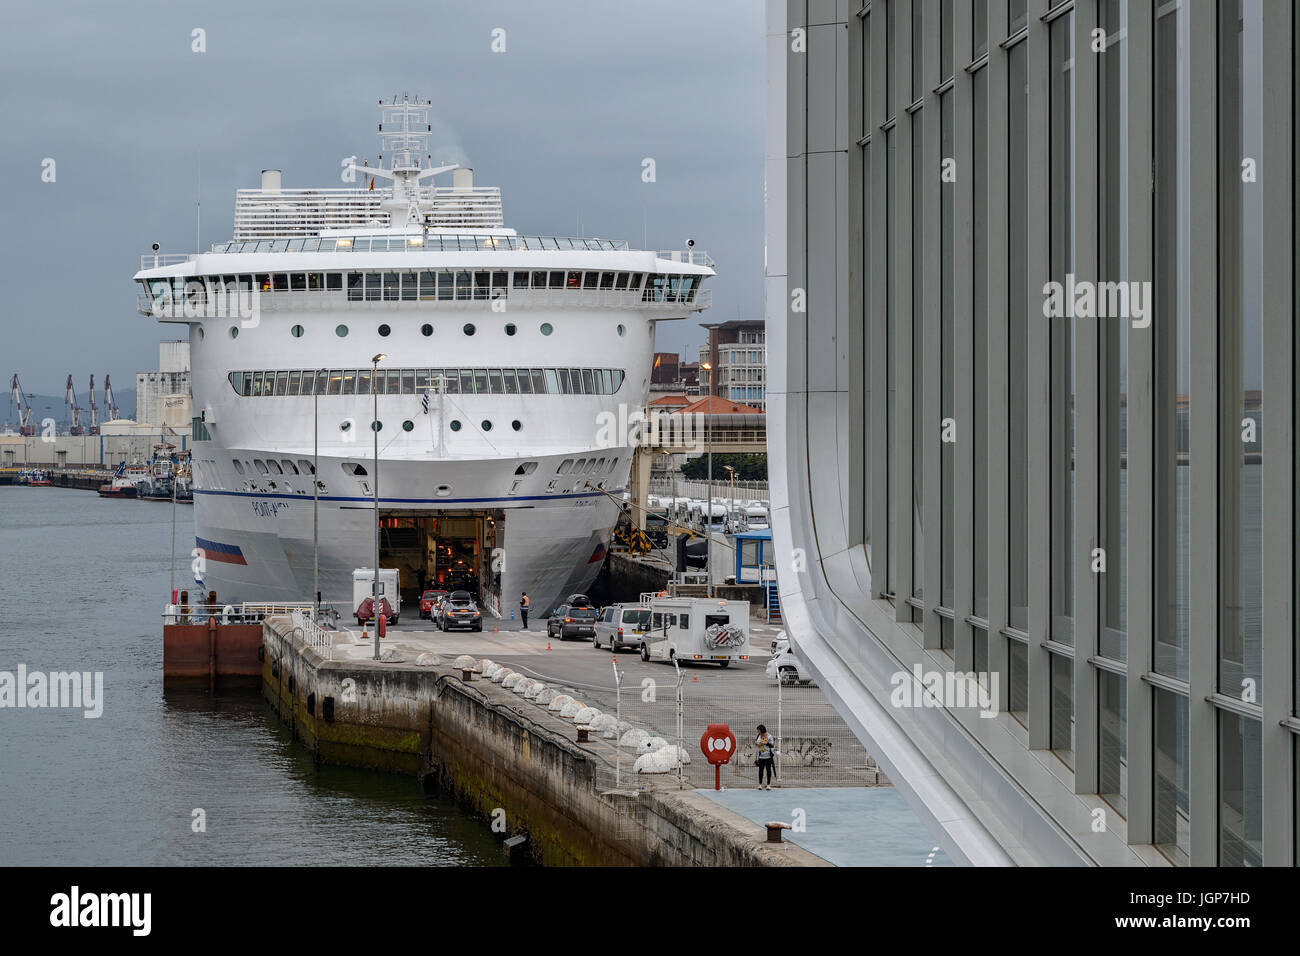 Cars embarking on the Brittany Ferry in the marine station of the city of Santander, Cantabria, Spain. Stock Photo